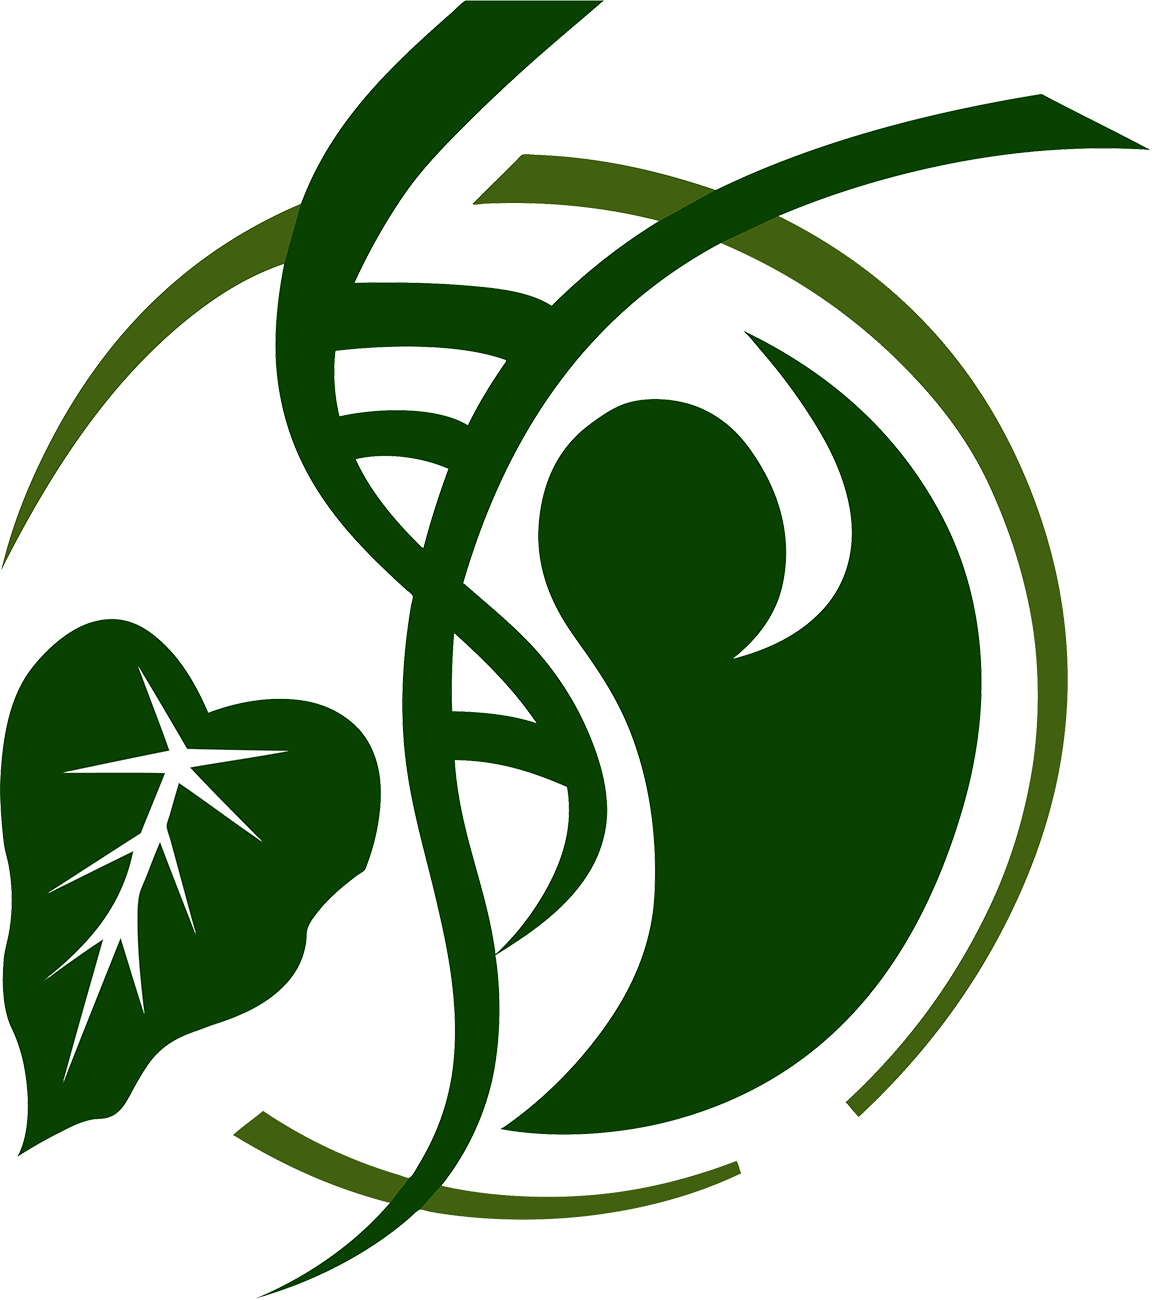 Green with White Outline Logo - Pacific Biosciences Research Center Logos